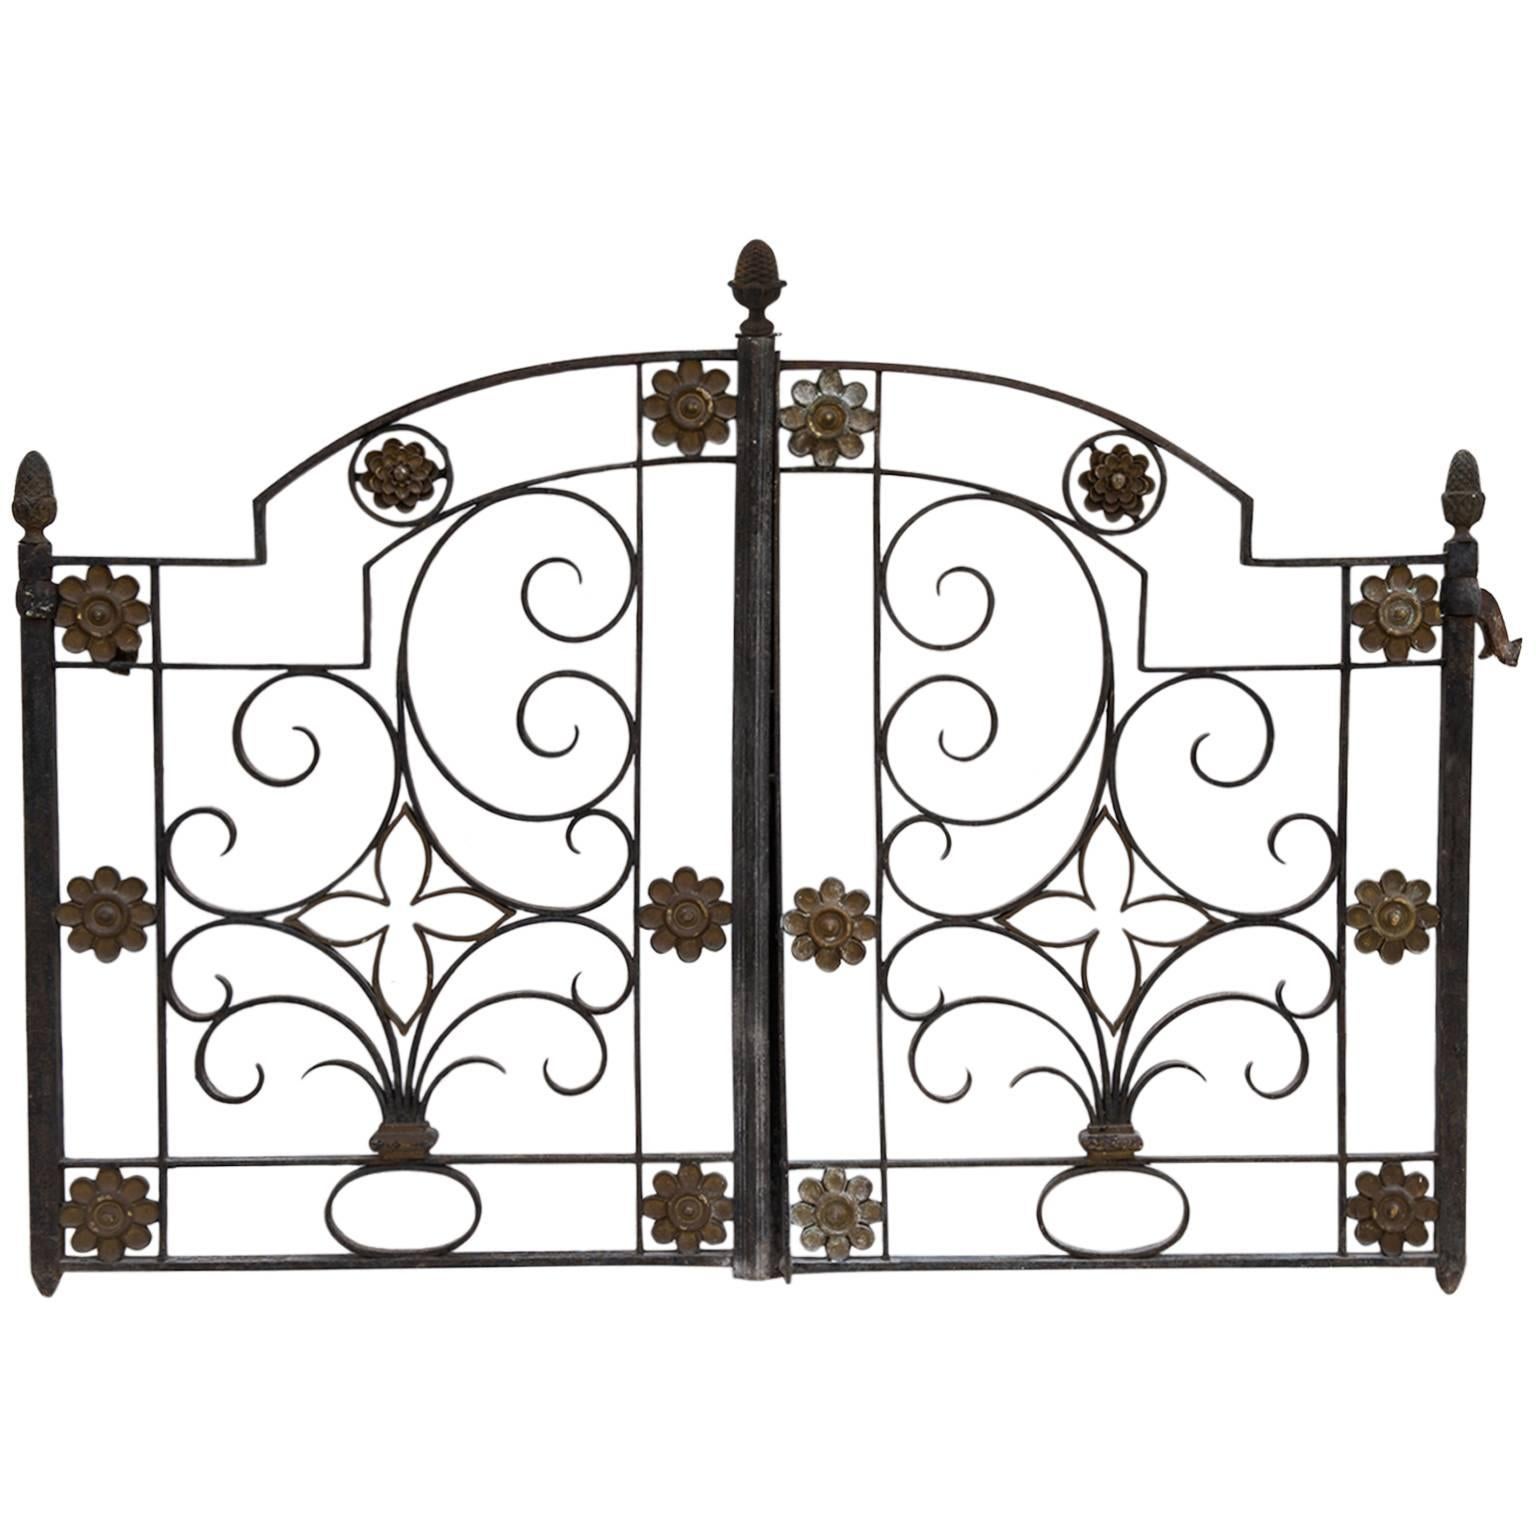   Little Antique Interior Gate or Bed Headboard